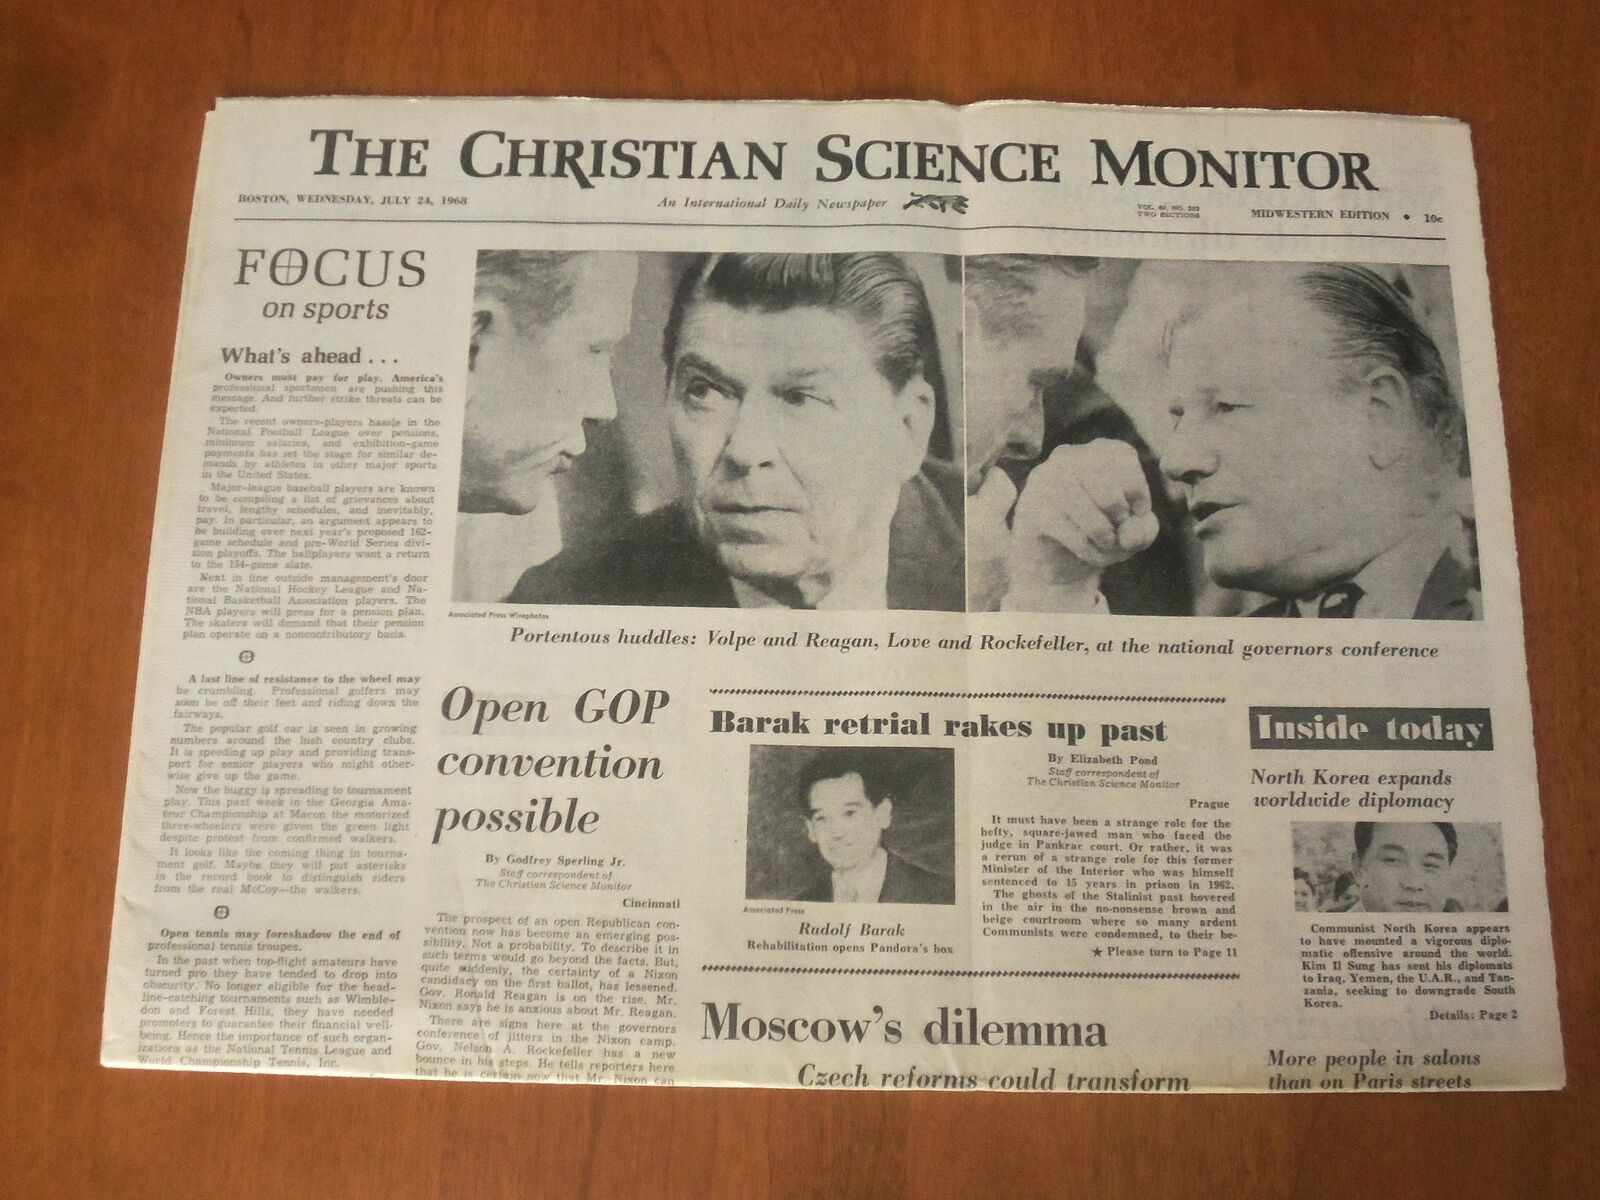 1968 JULY 24 THE CHRISTIAN SCIENCE MONITOR -OPEN BOP CONVENTION POSSIBLE-NP 4663